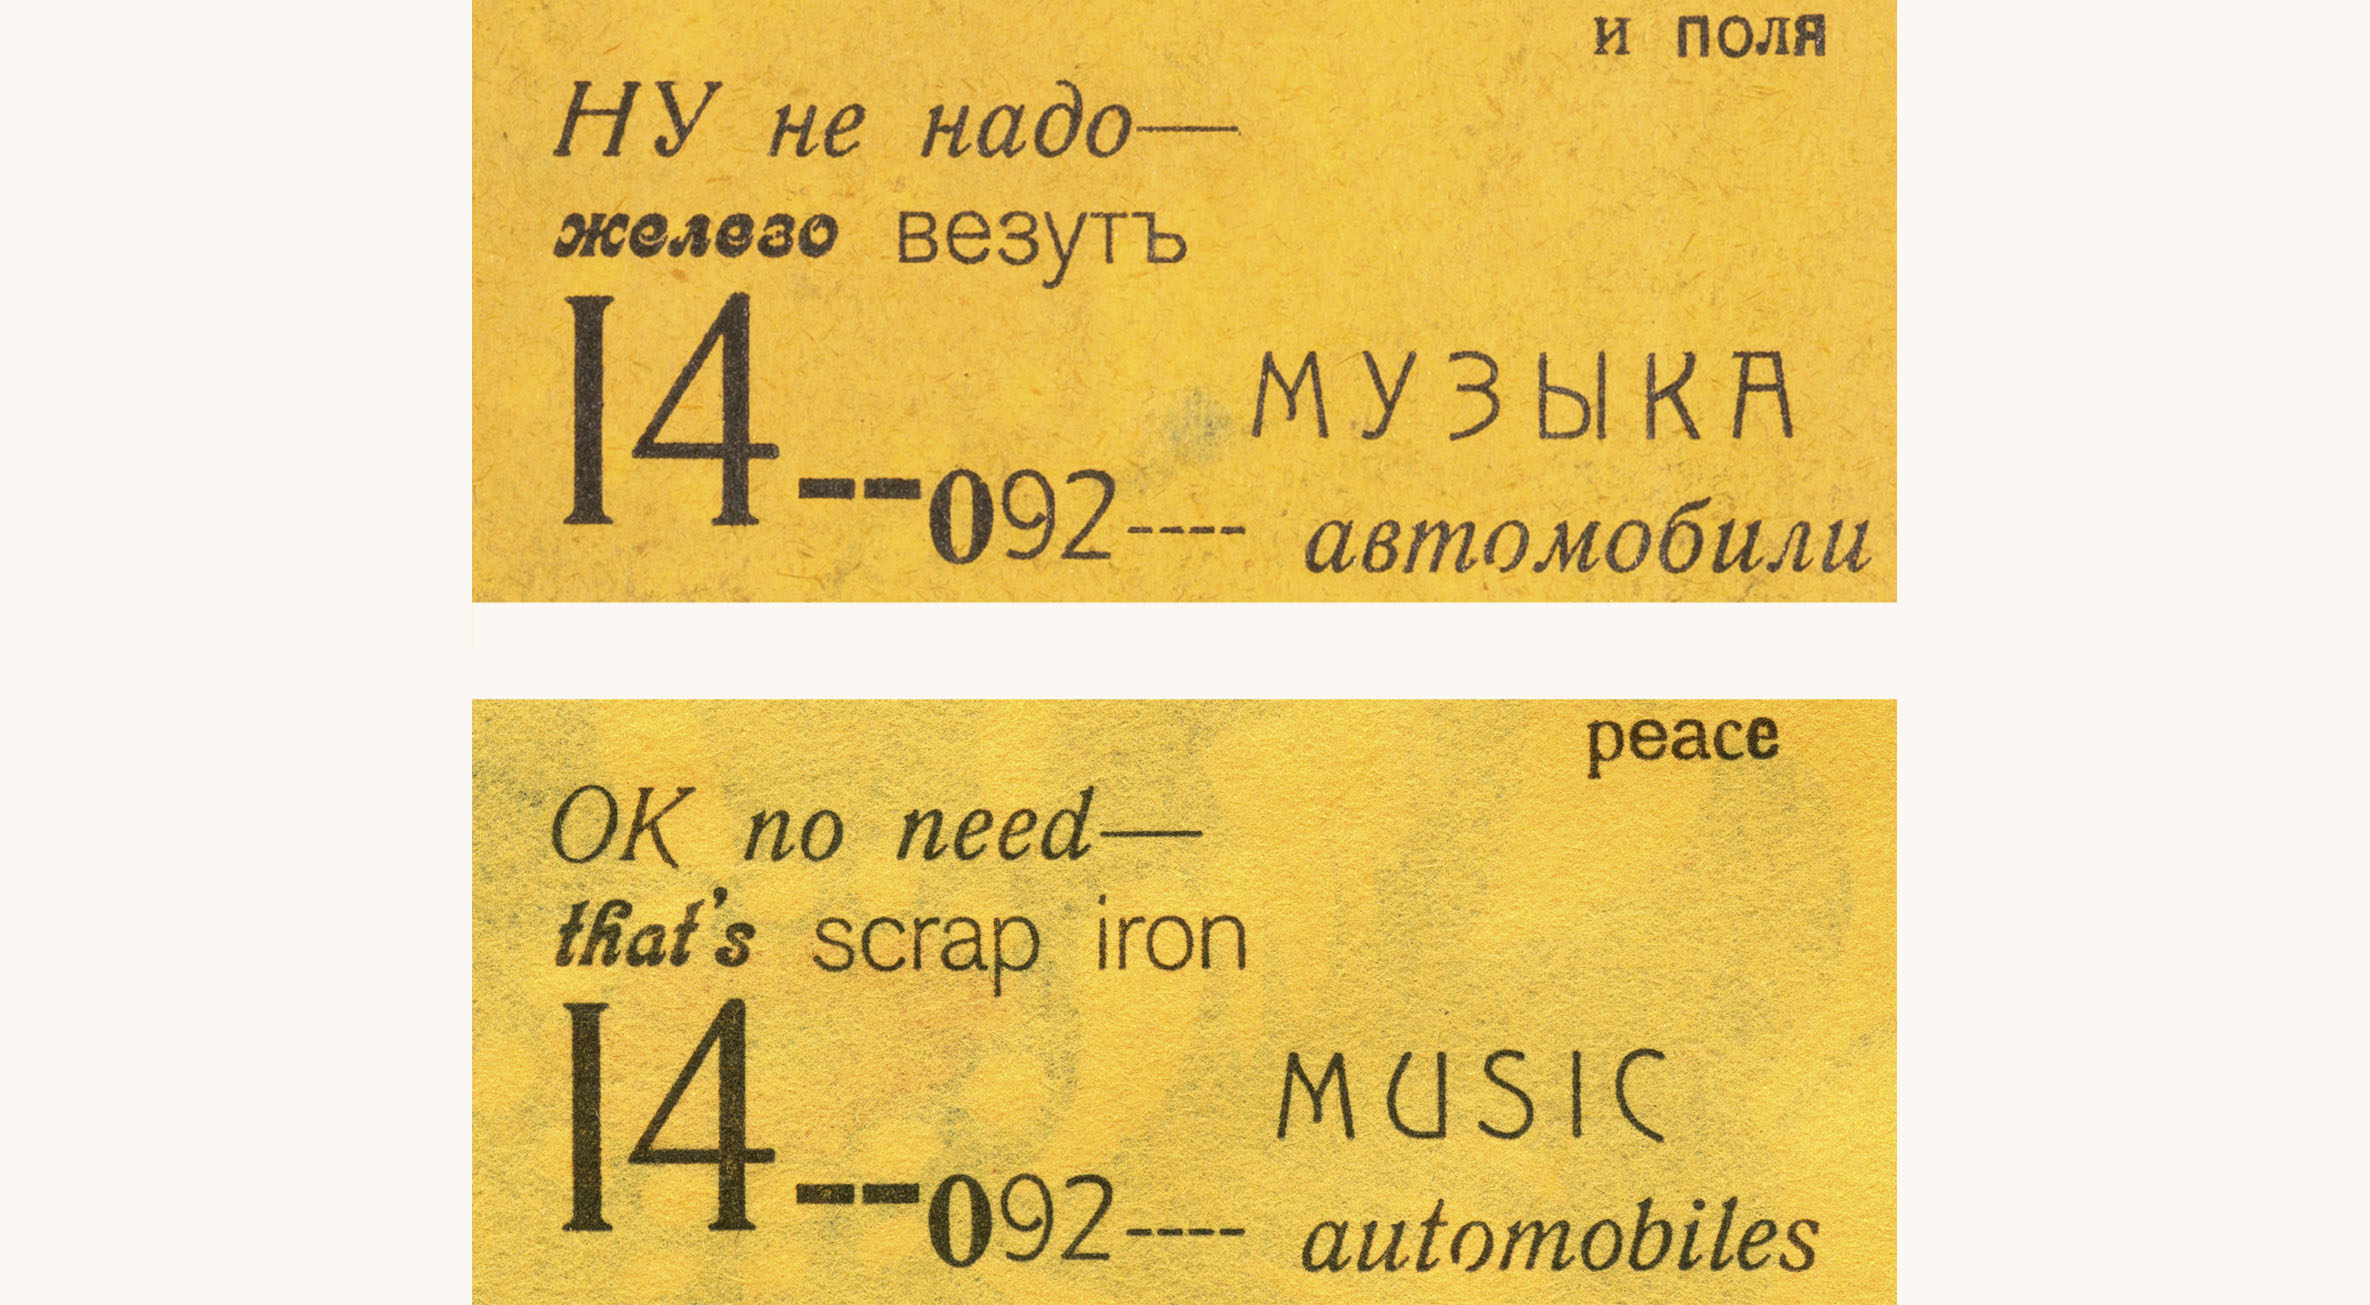 Detail from the Telephone poem in English and Russian showing careful correspondence and similarly damaged type.